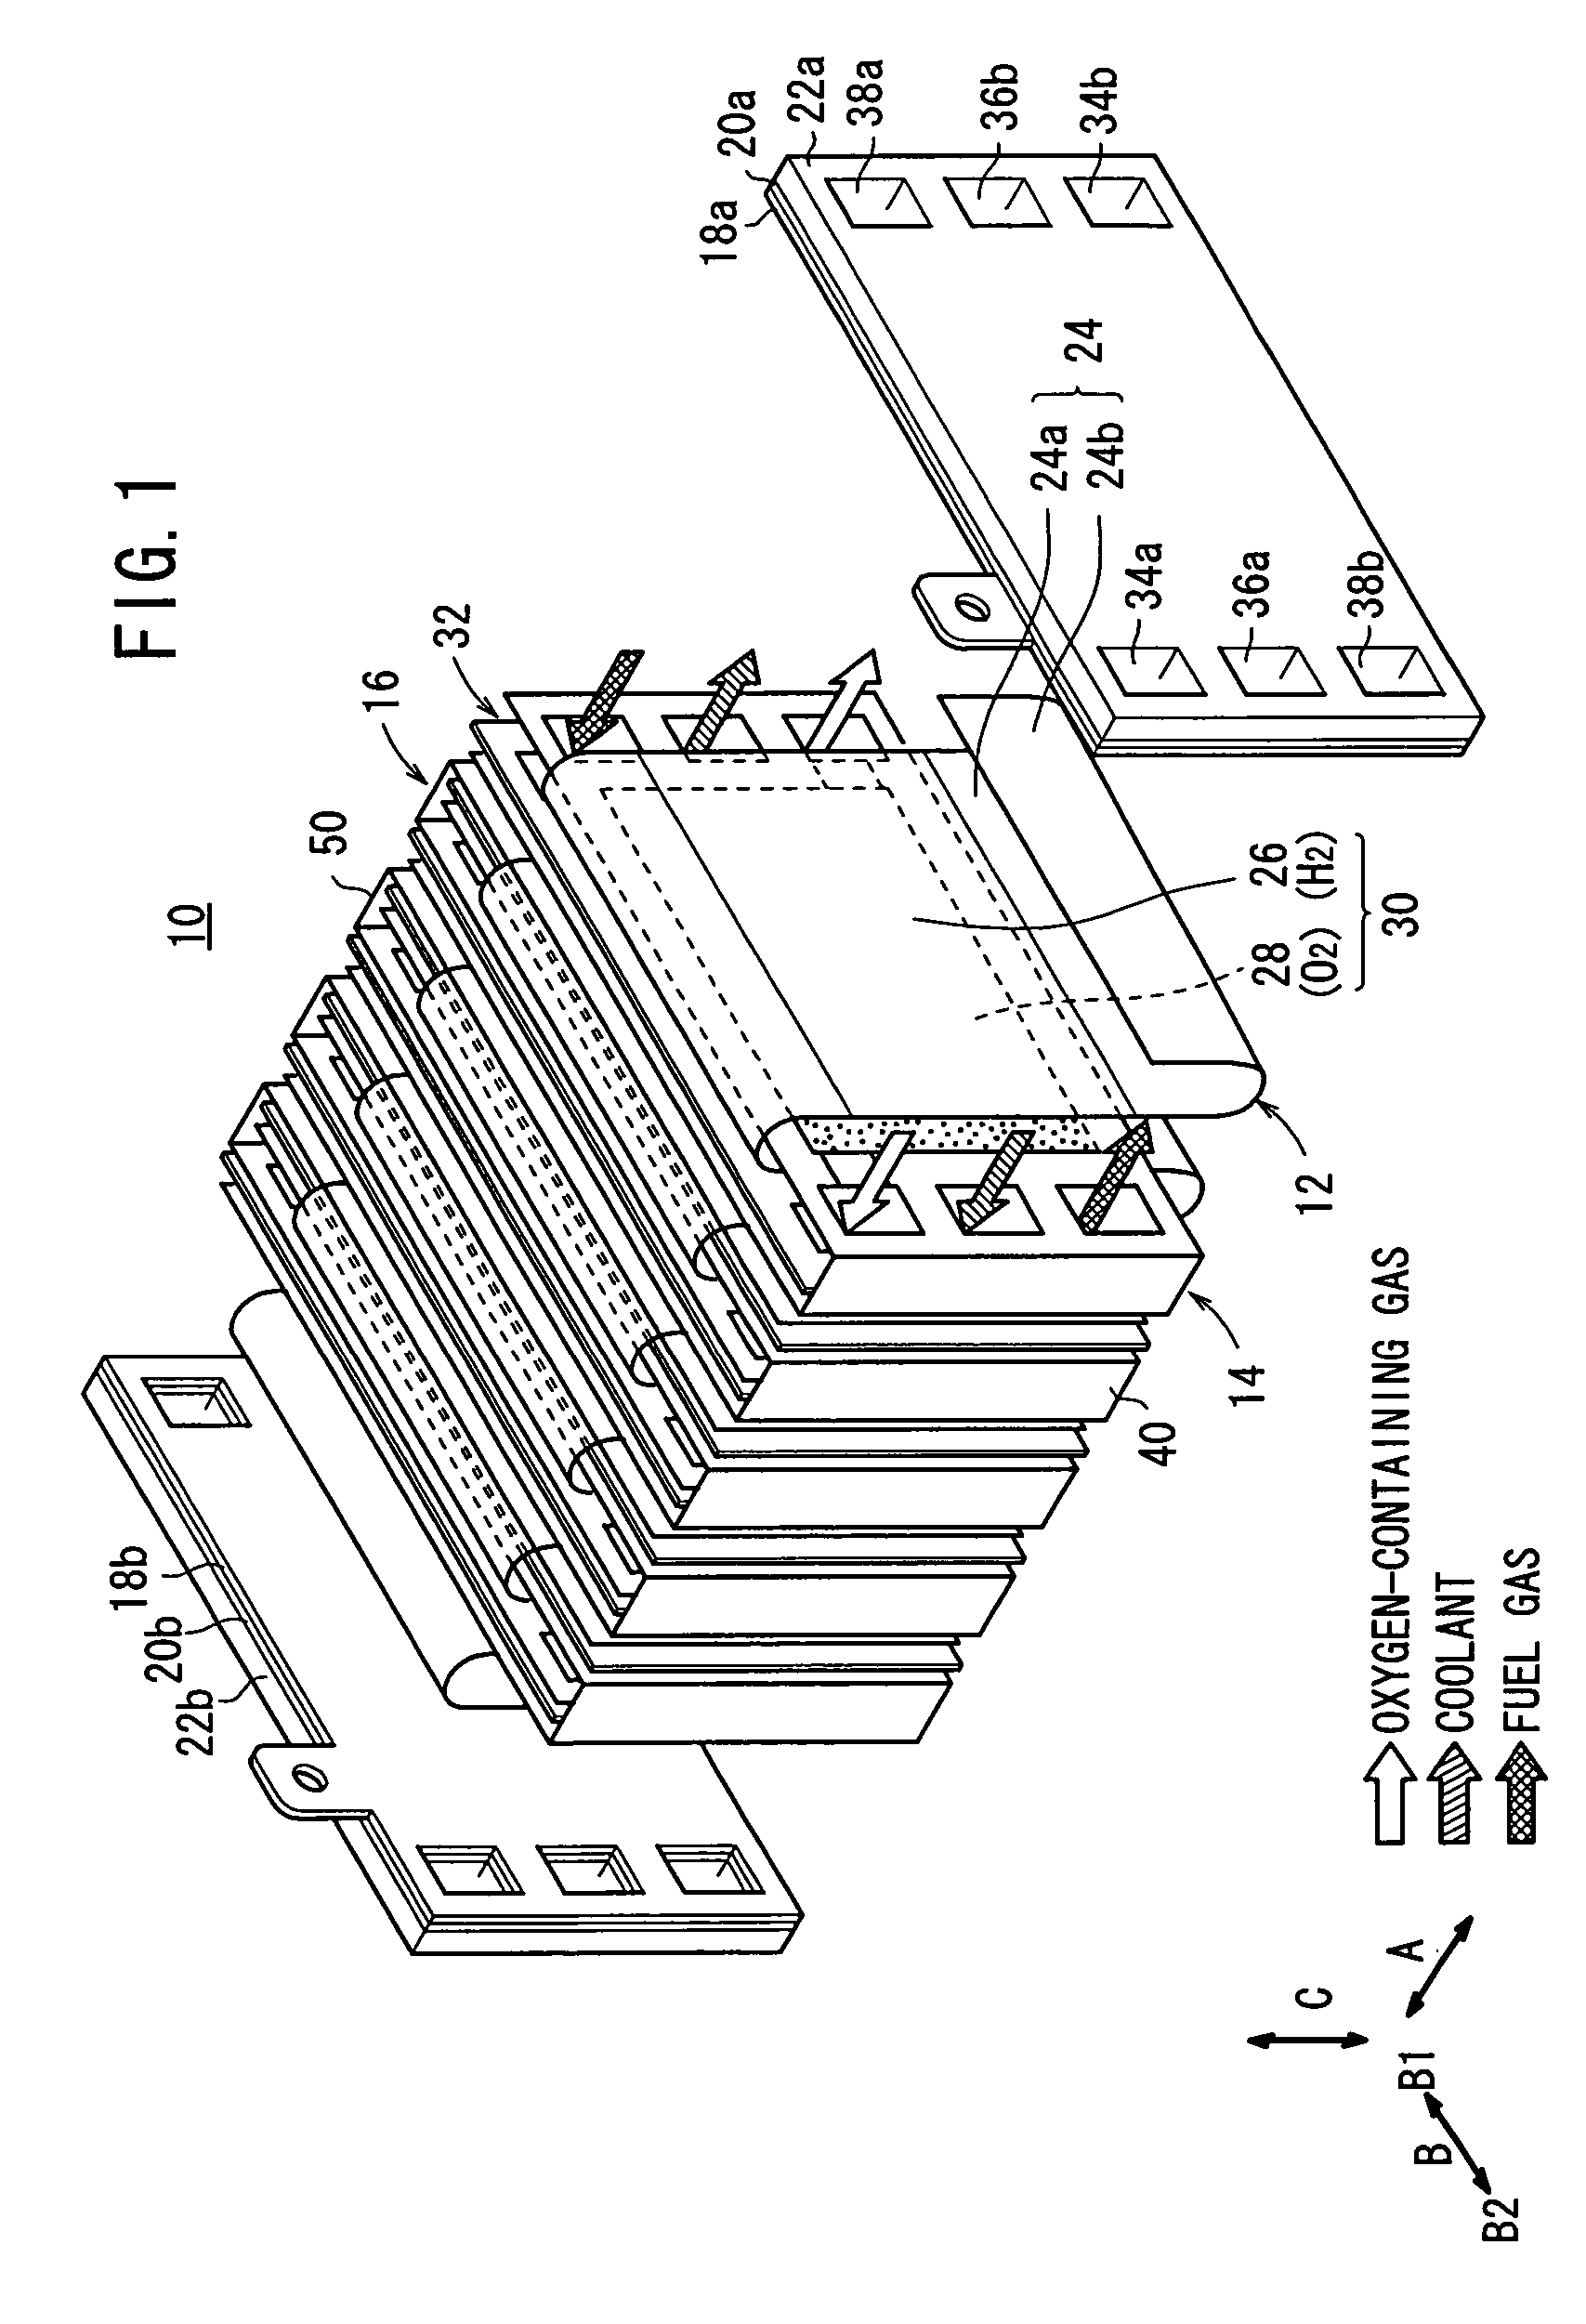 Fuel cell with interweaving current collector and membrane electrode assembly